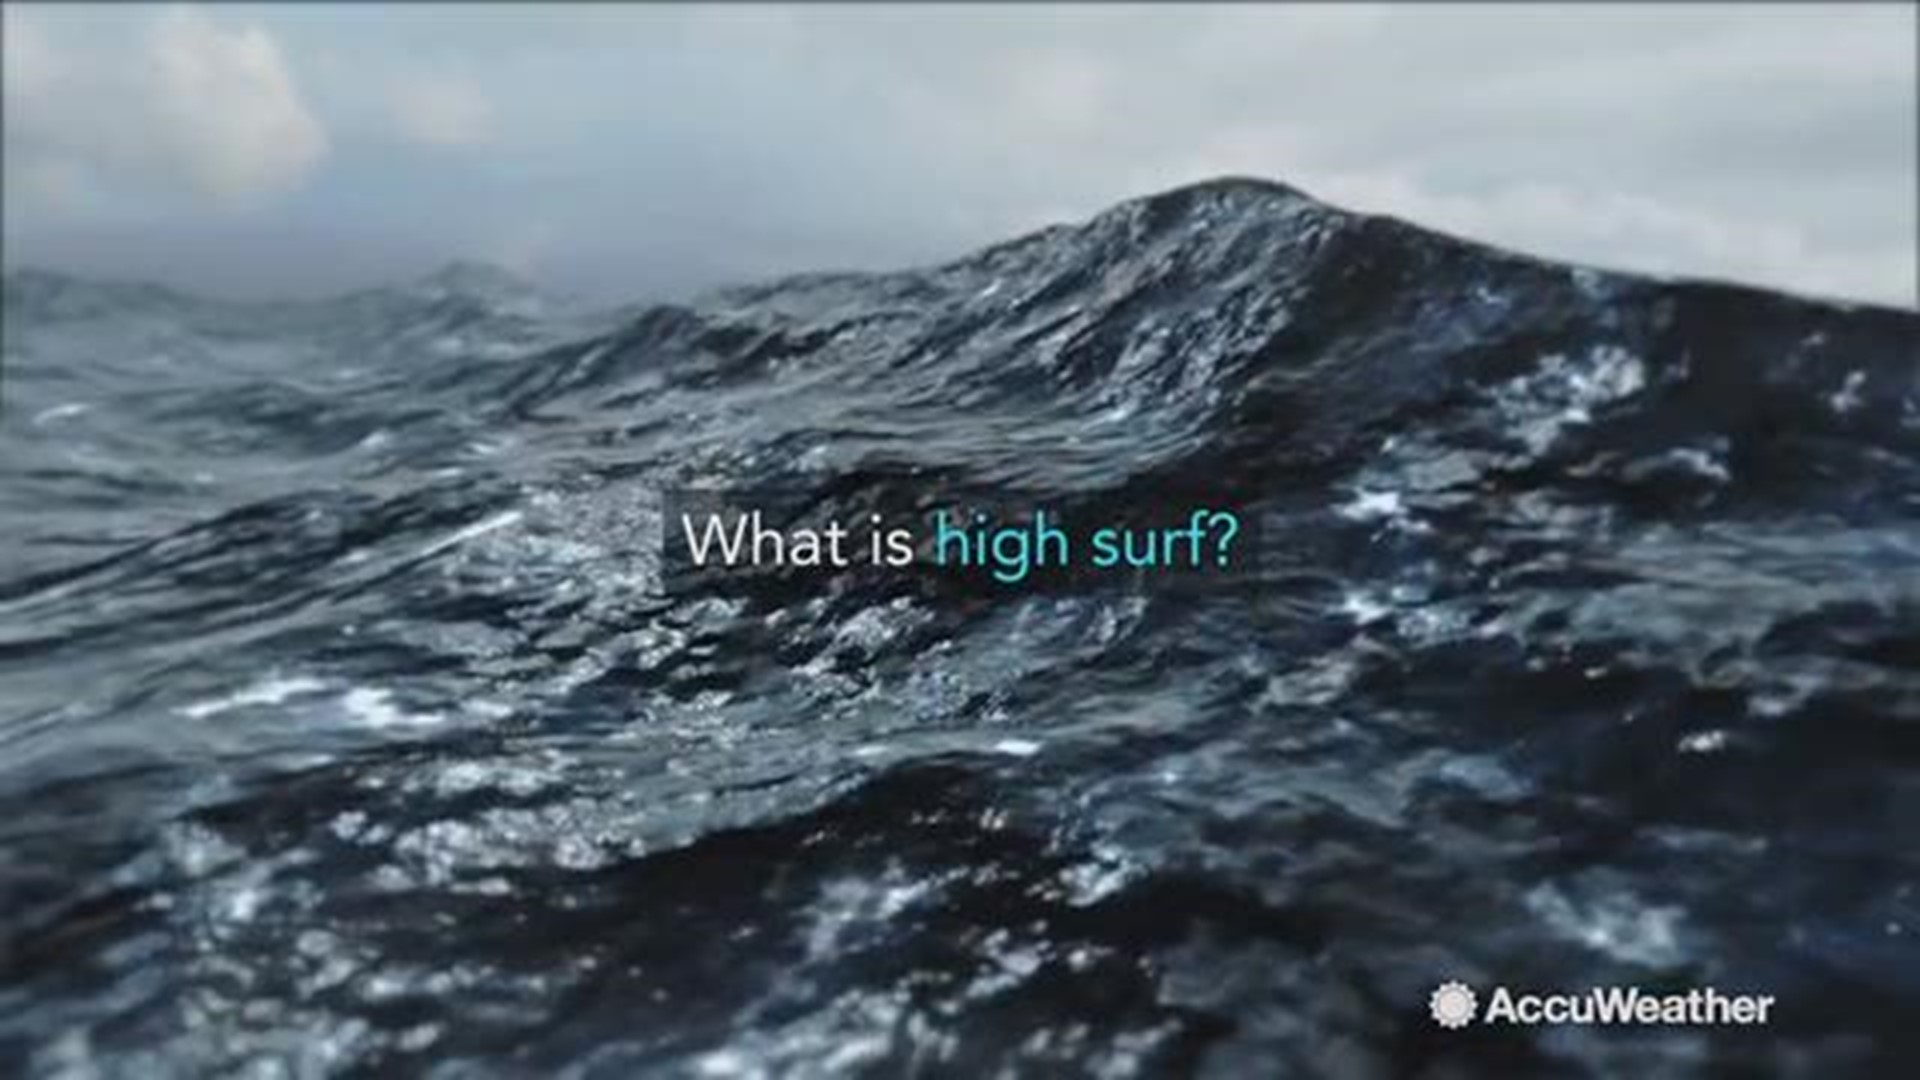 High surf is a dangerous shoreline condition you should look out for!